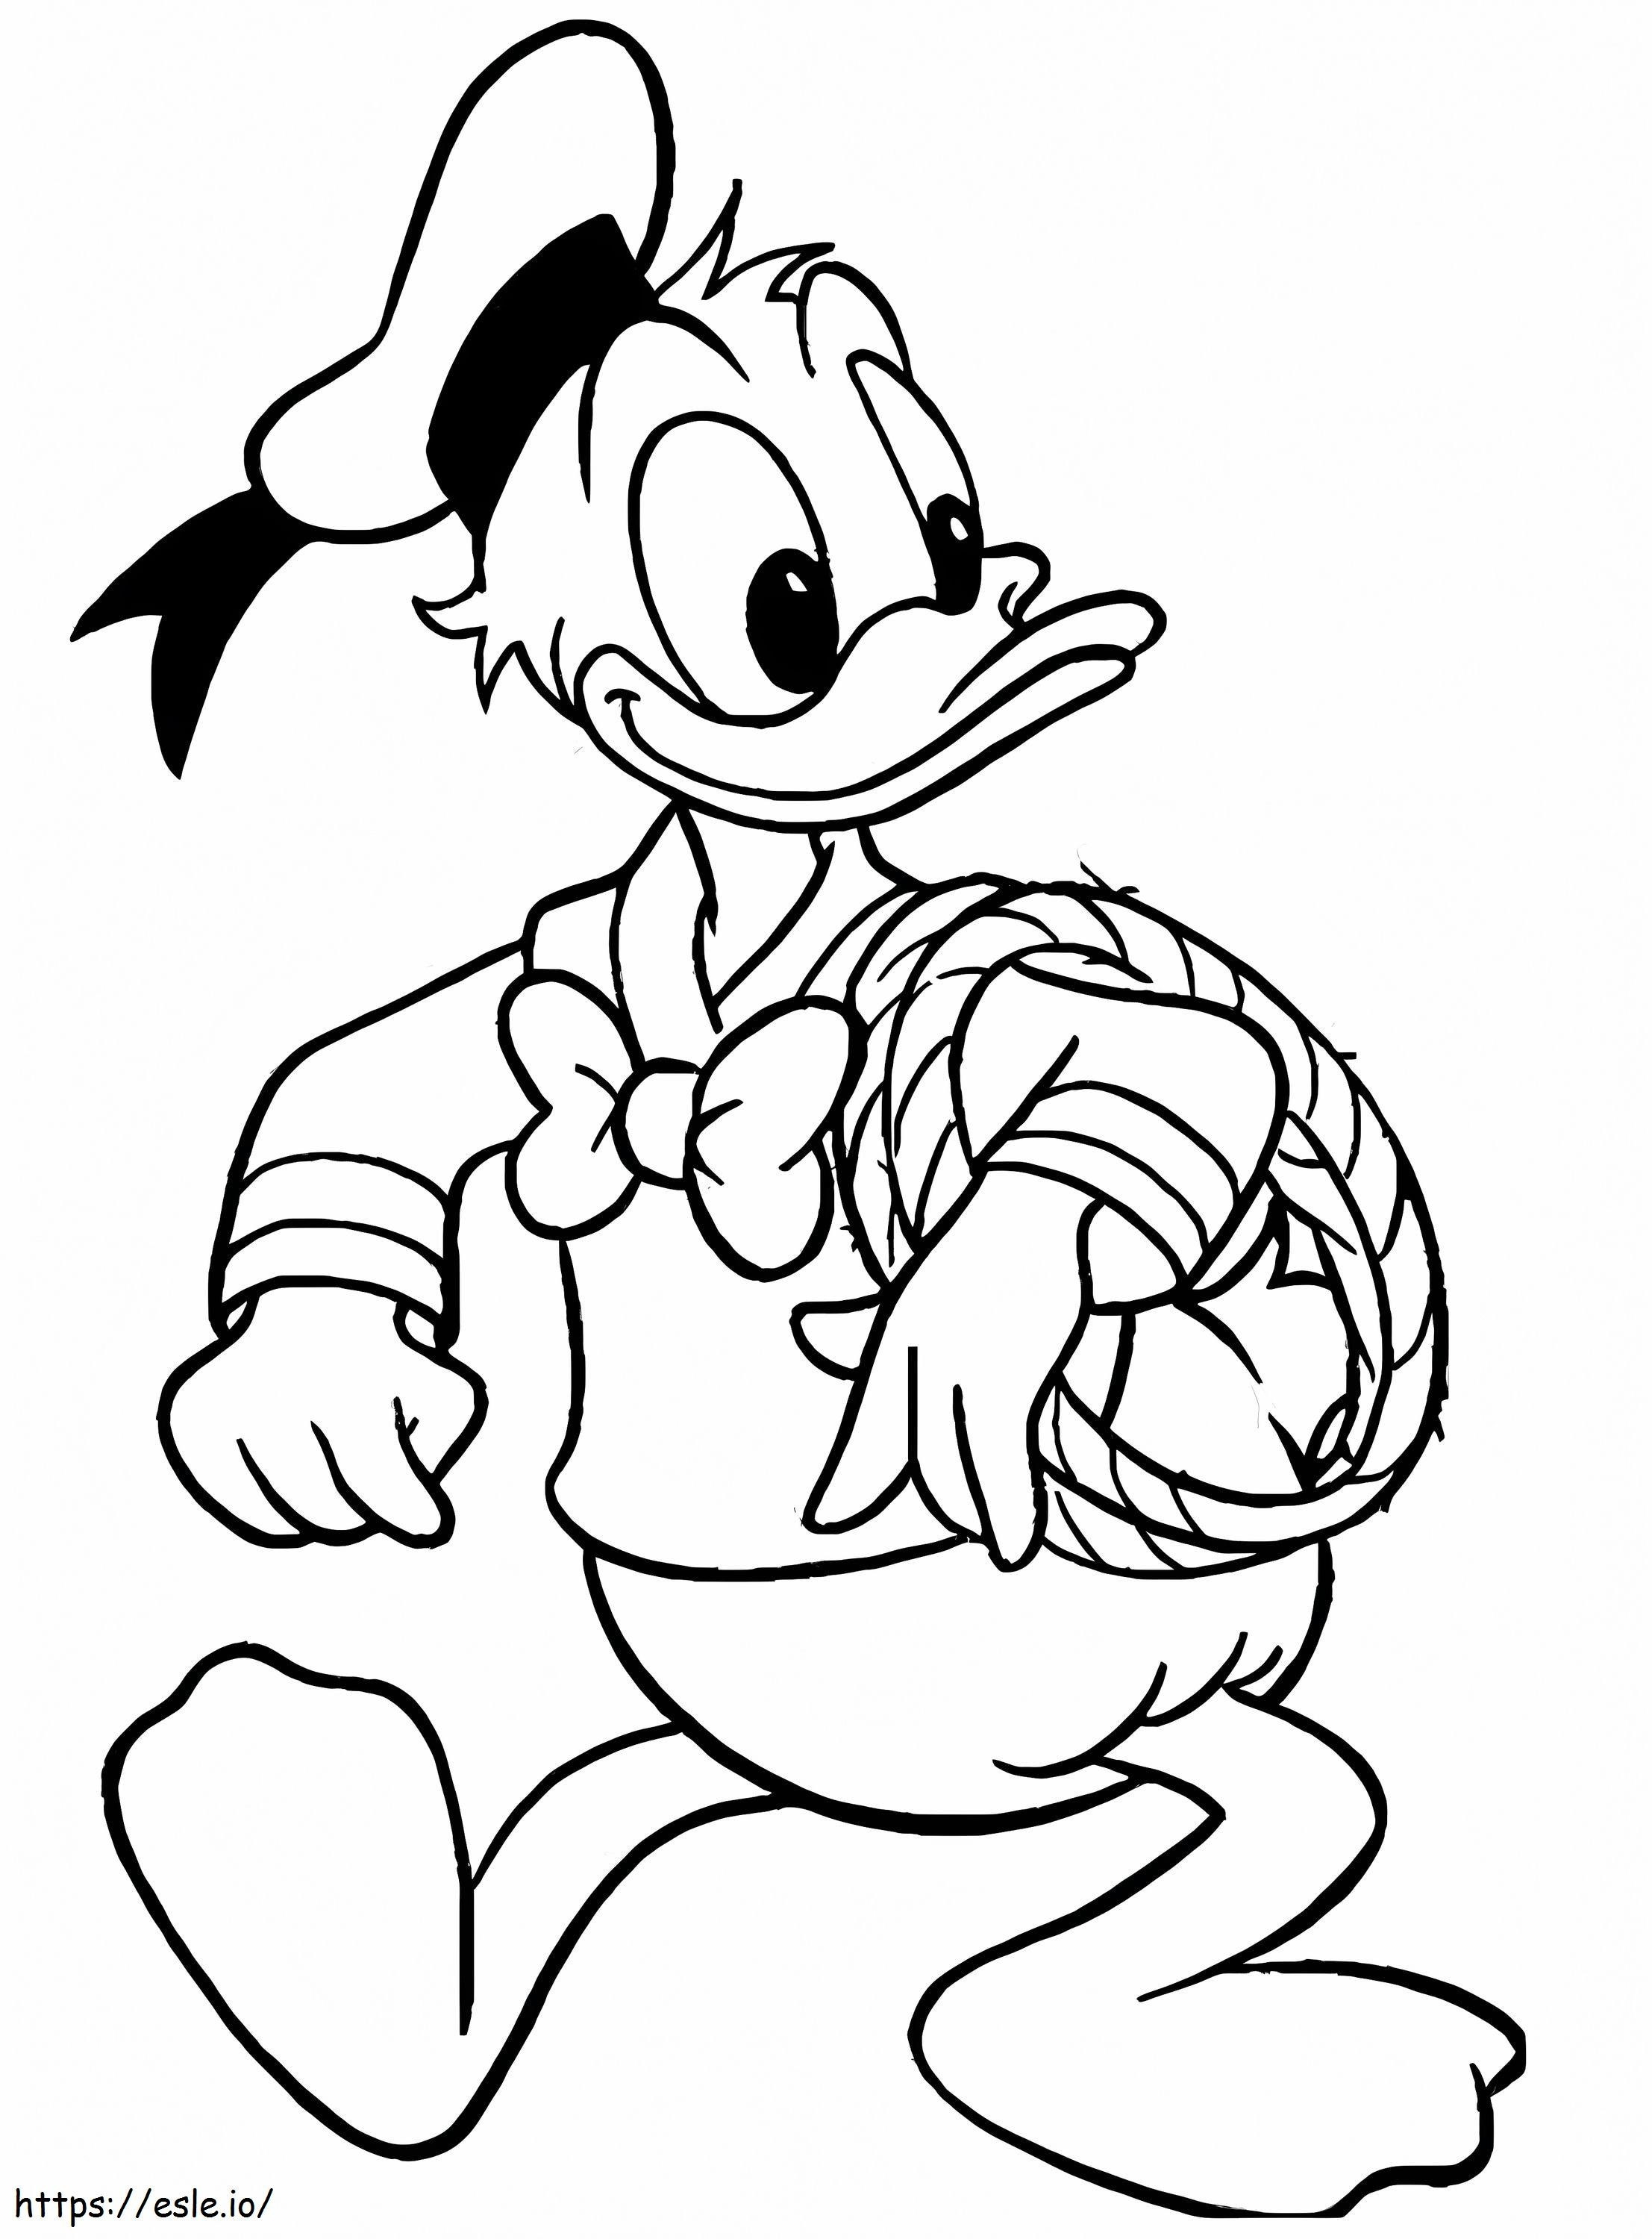 Happy Donald 4 coloring page